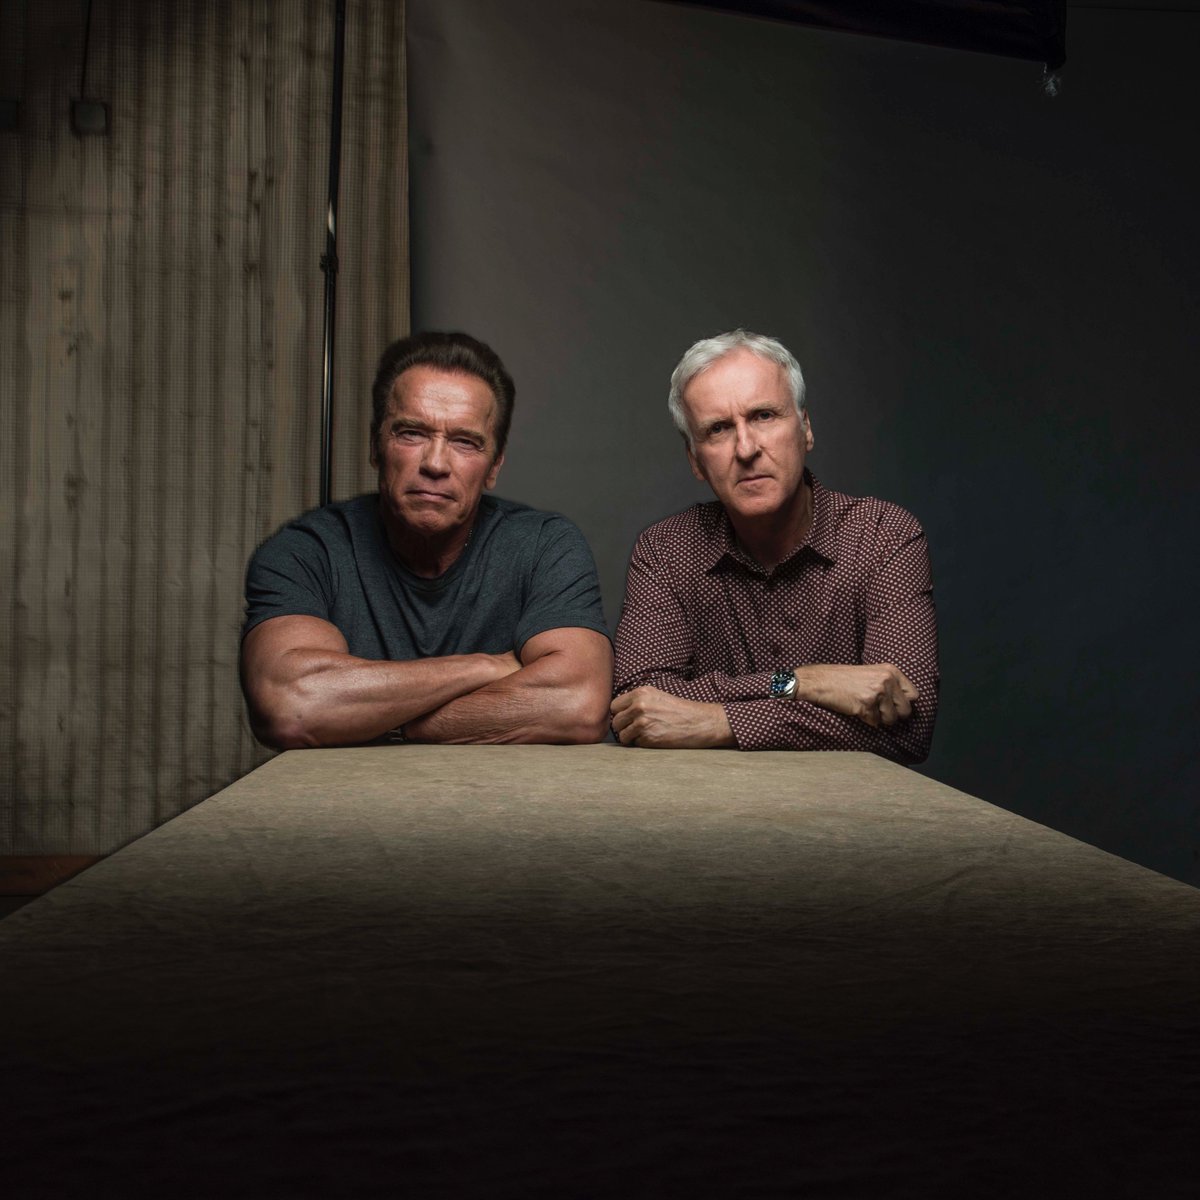 RT @WildAid: Why James Cameron & Arnold @Schwarzenegger Want You to Eat Less Meat https://t.co/bACXPYMkly @VanityFair @KateyRich https://t.…